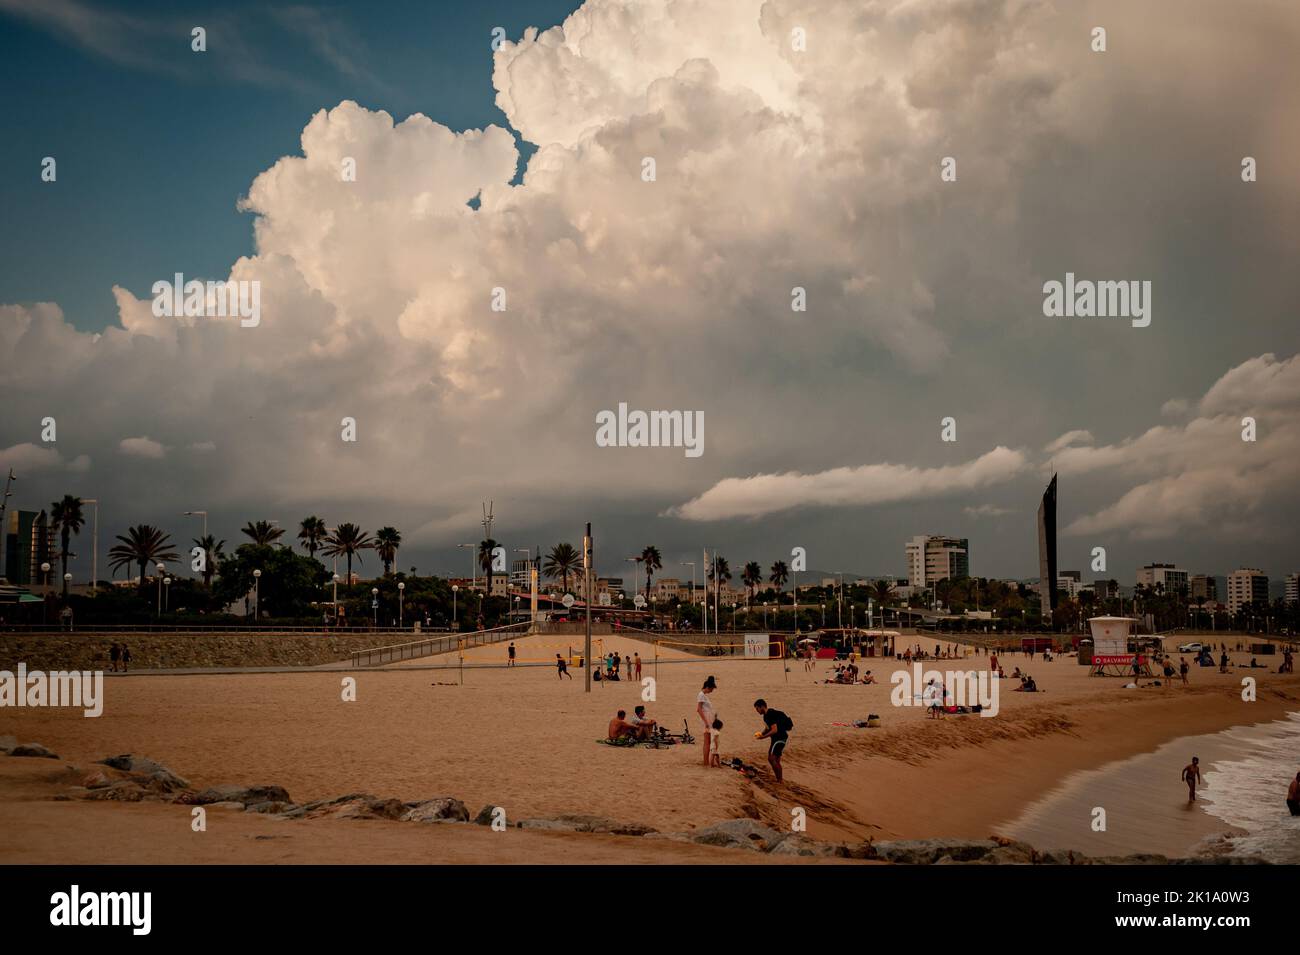 September 16, 2022, Barcelona, Spain: People spend the afternoon at the beach as stormy clouds roll across the sky in Barcelona, Spain. Credit: Jordi Boixareu/Alamy Live News Stock Photo